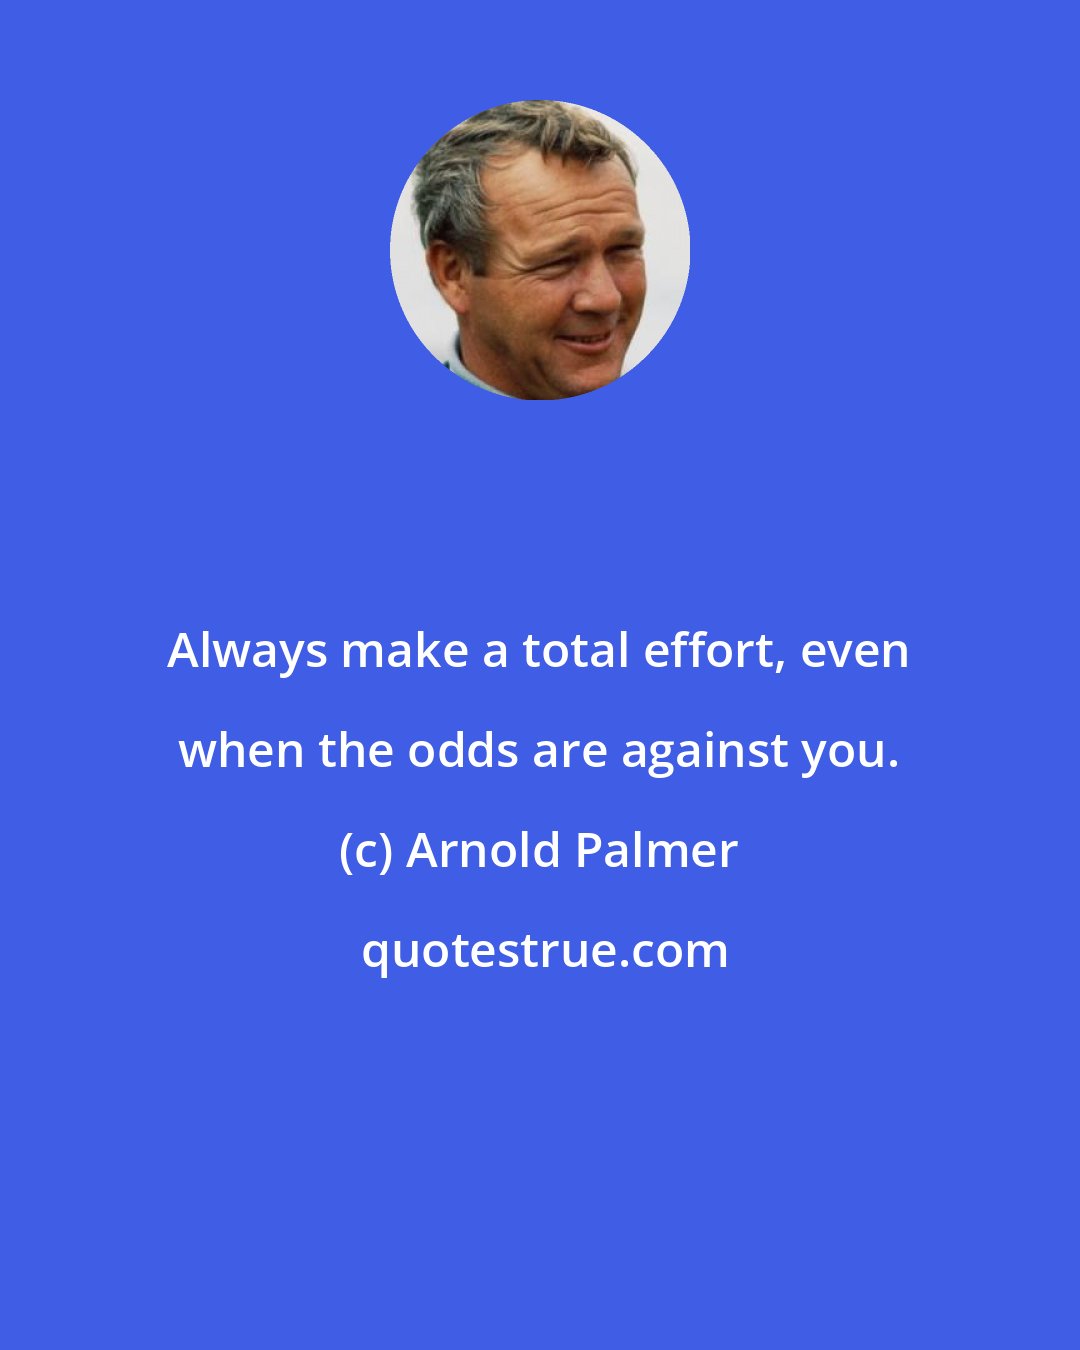 Arnold Palmer: Always make a total effort, even when the odds are against you.